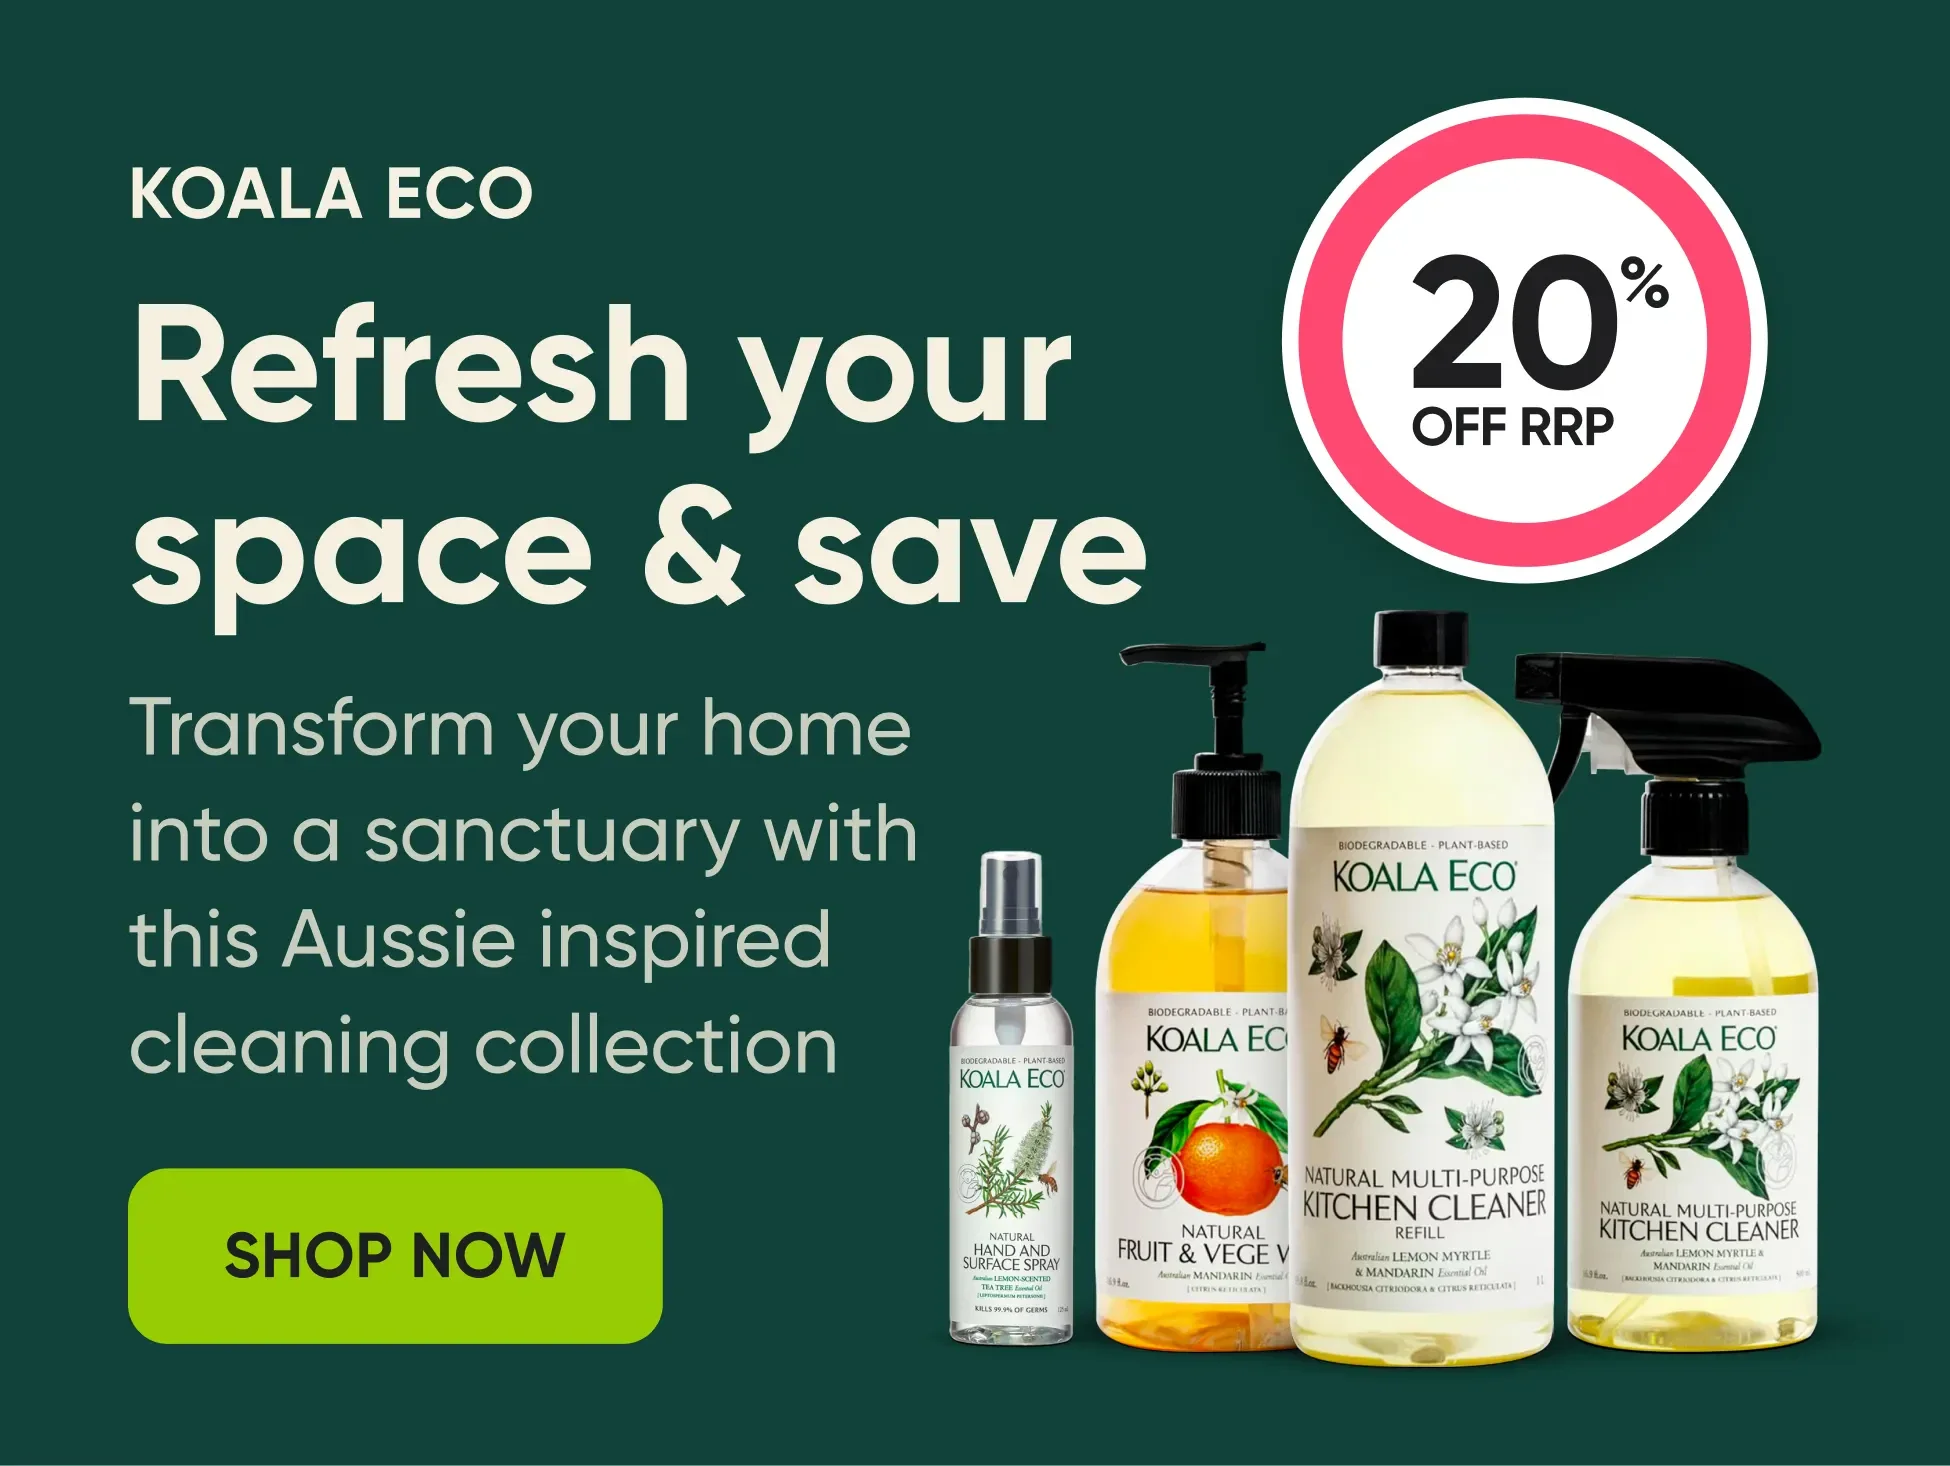 Refresh your space & save. Transform your home into a sanctuary with this Aussie inspired cleaning collection.